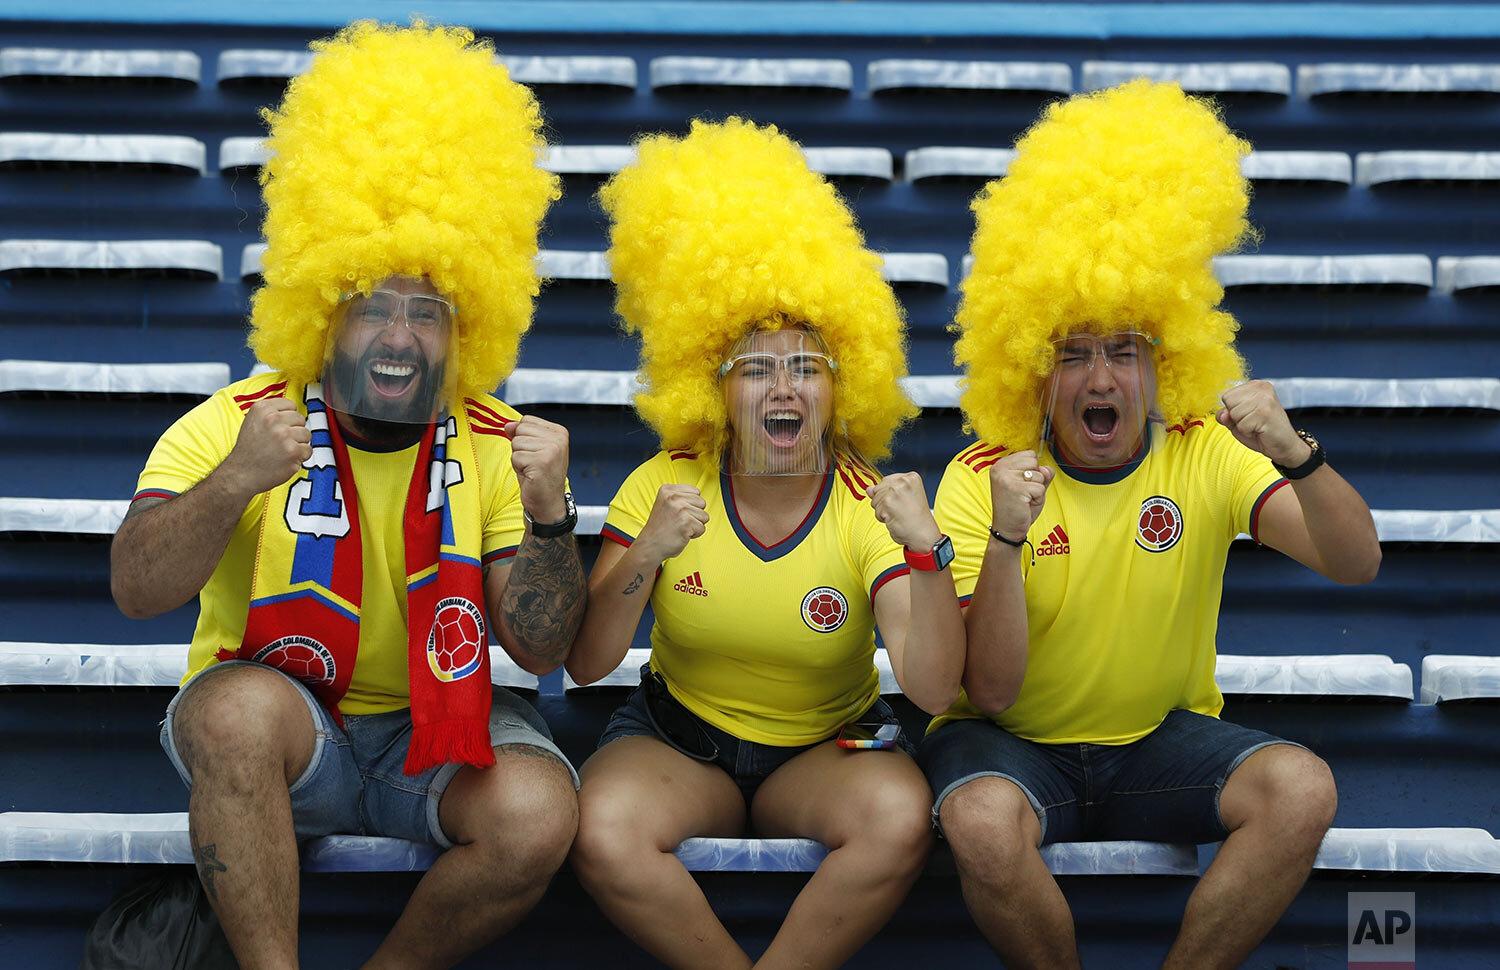  Colombia soccer fans cheer prior a FIFA World Cup Qatar 2022 qualifying soccer match against Argentina in Barranquilla, Colombia, June 8, 2021. (AP Photo/Fernando Vergara) 